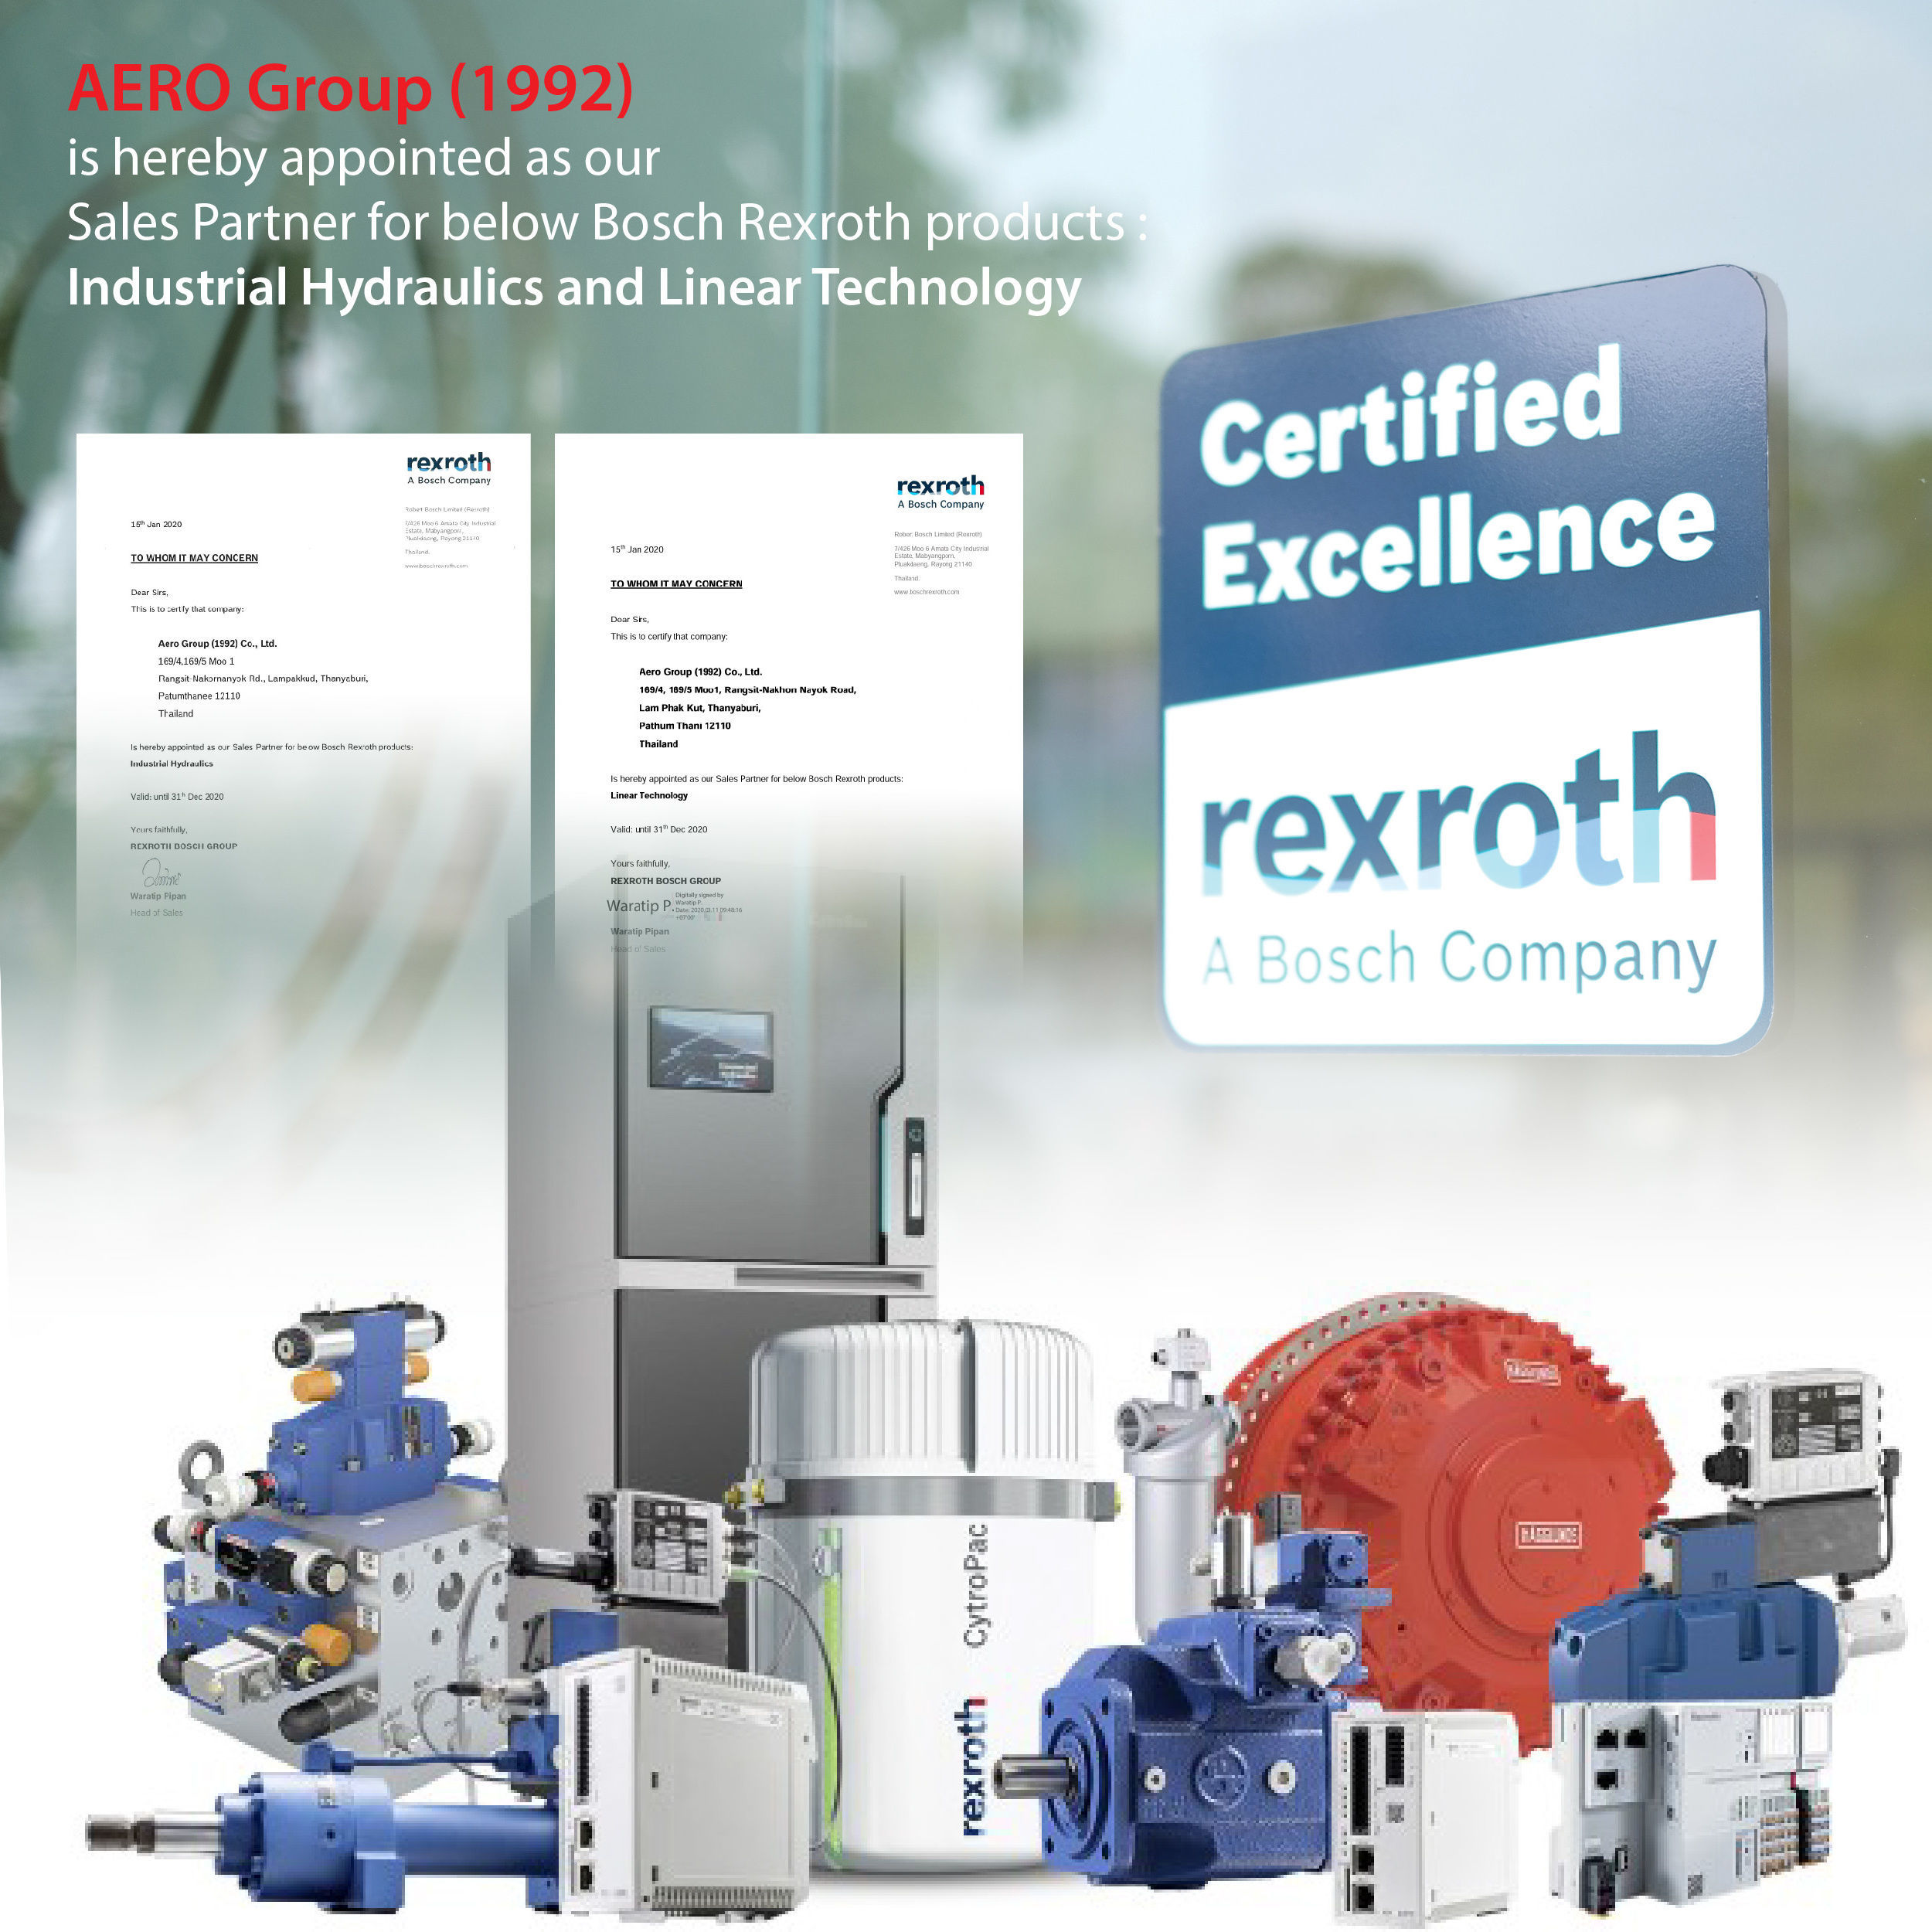 AERO Group (1992) is hereby appointed as our Sales Partner for below Bosch Rexroth products : Industrial Hydraulics and Linear Technology